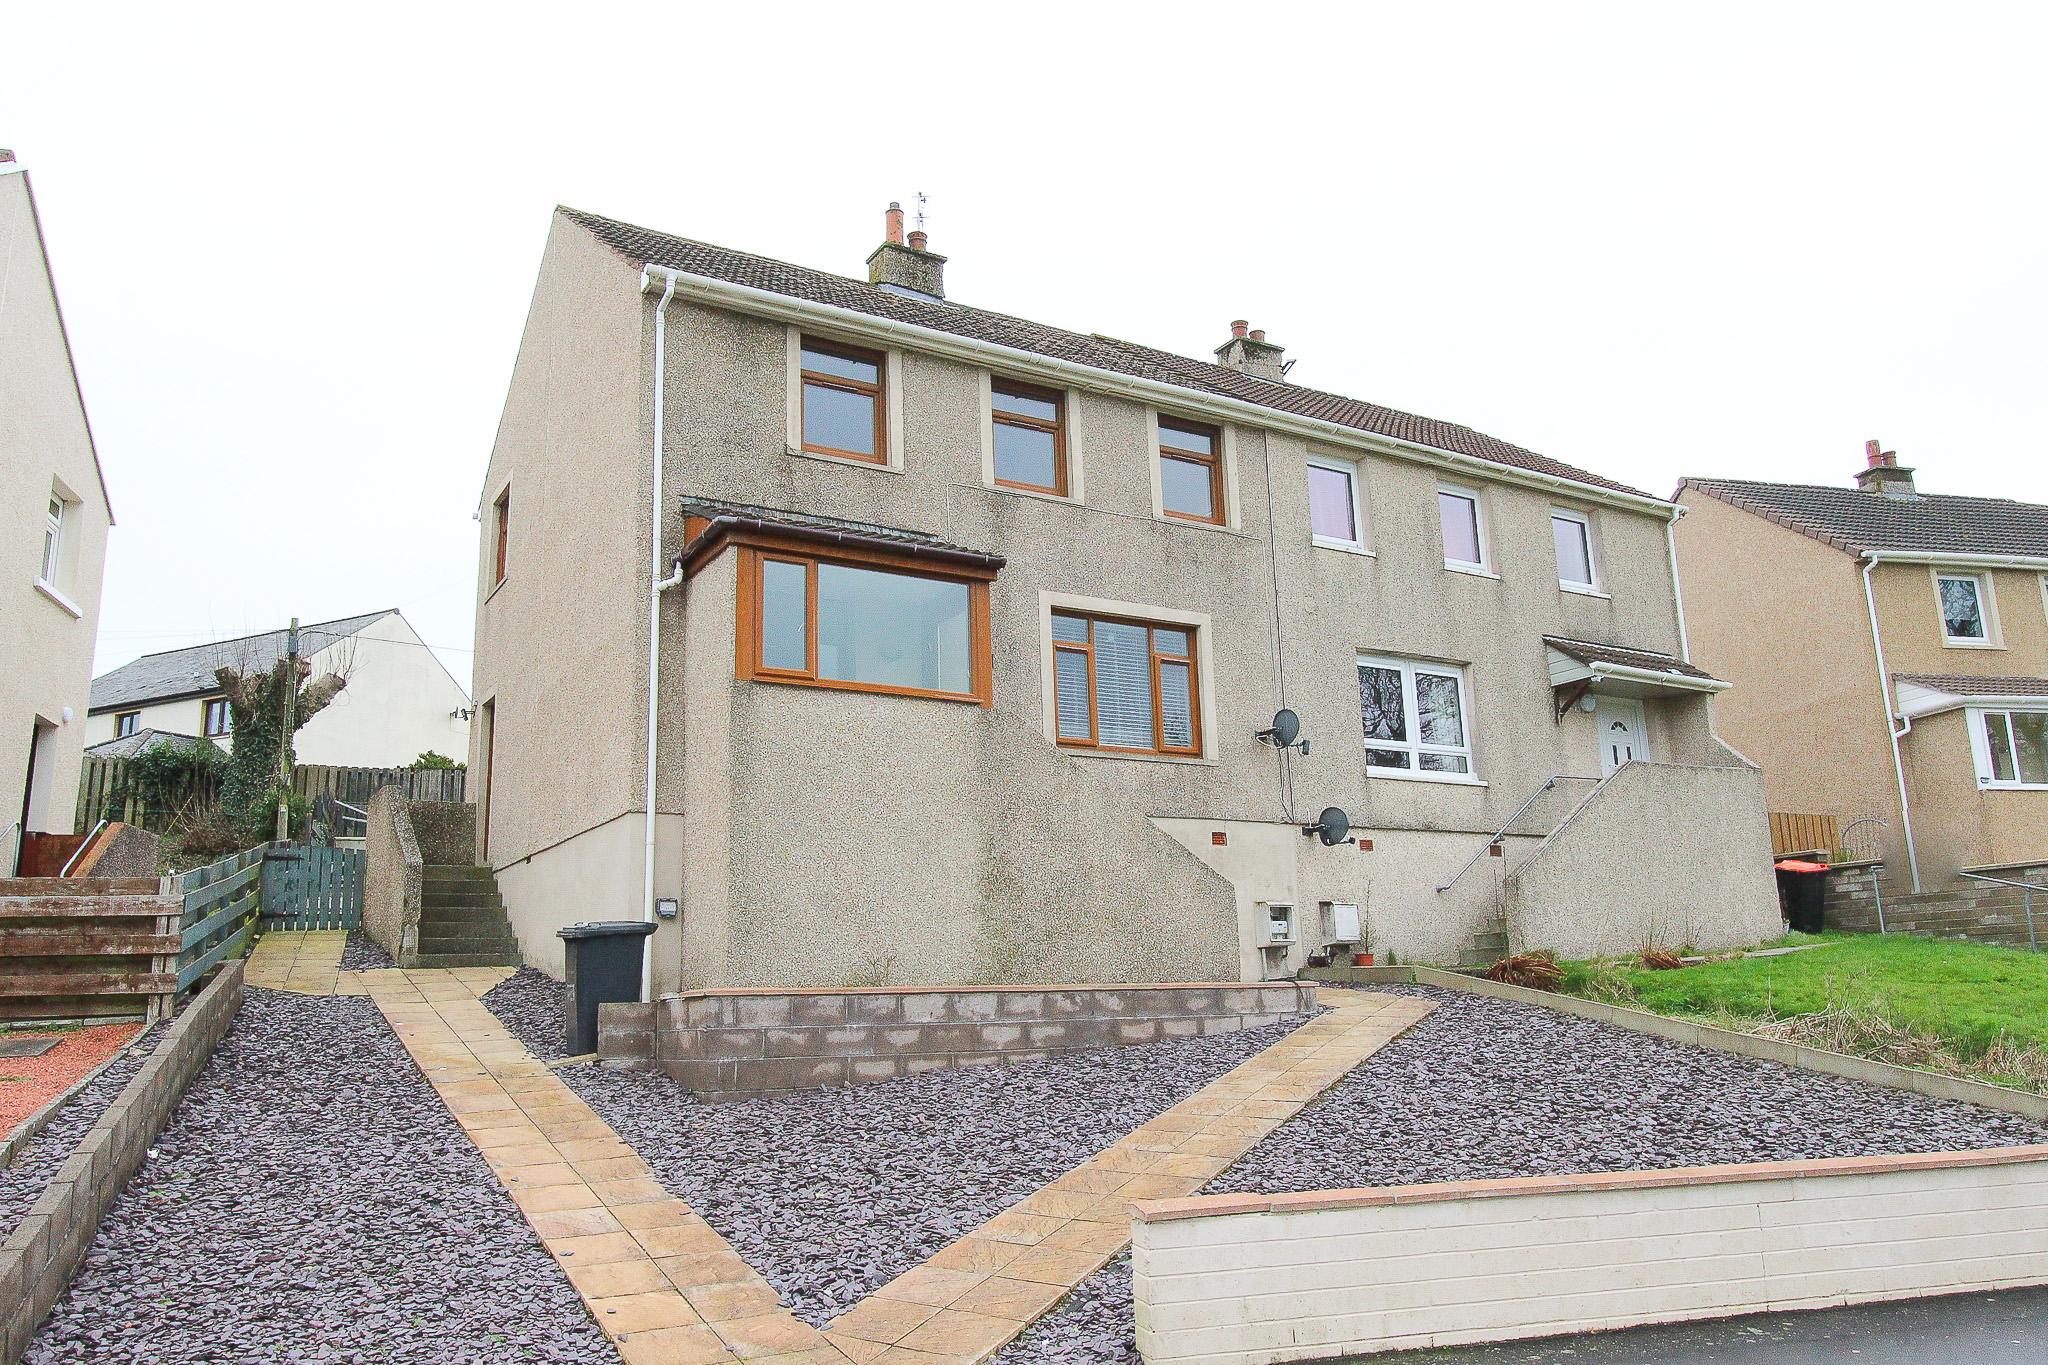 Photograph of 29 Queen's Drive, Stranraer